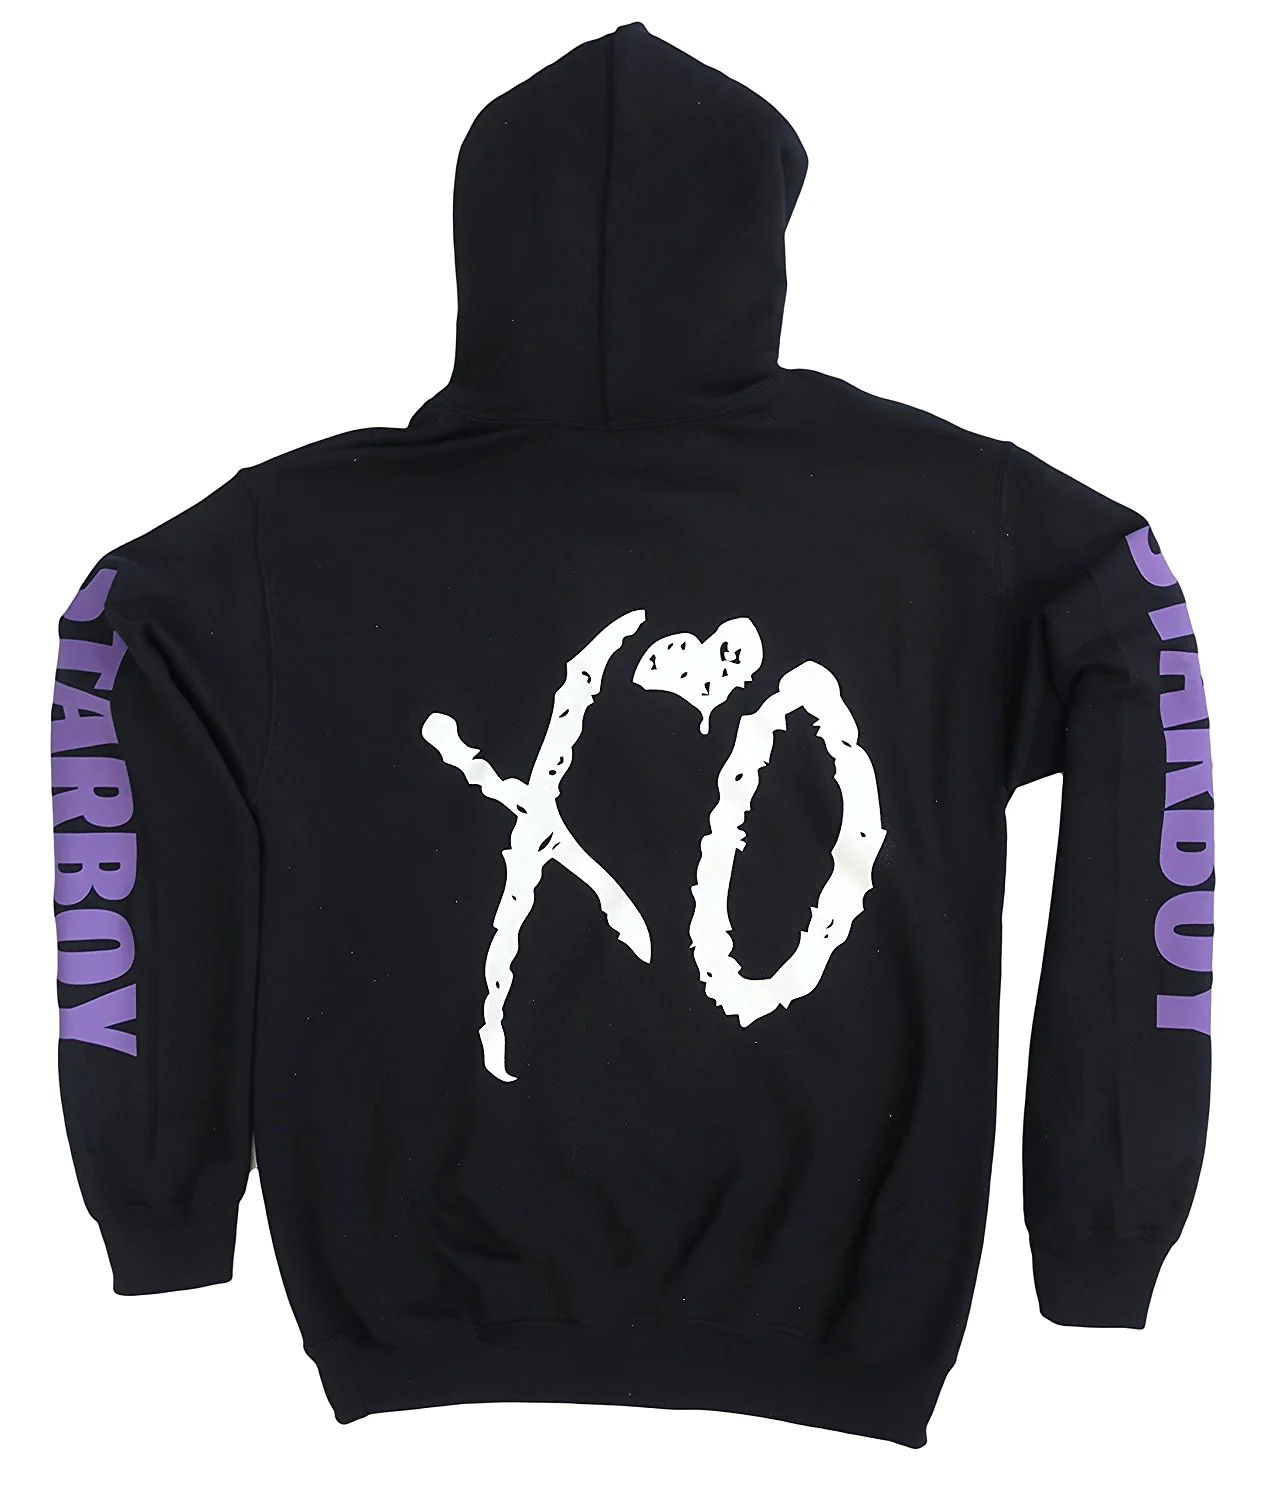 Shop the Latest The Weeknd Gear and Merchandise